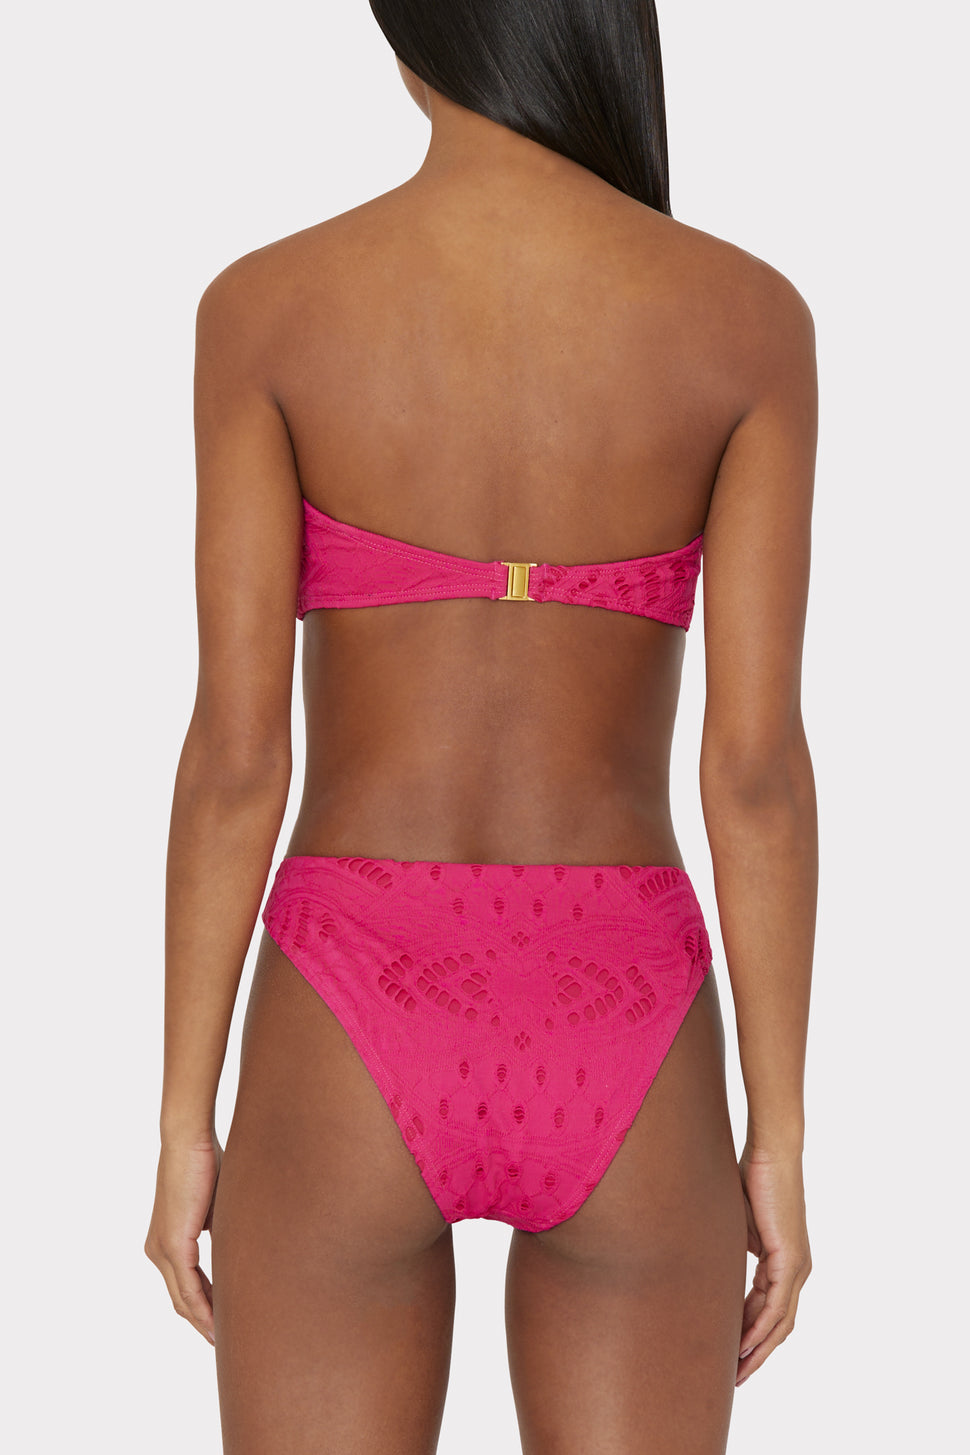 Lace | Bandeau MILLY - Eyelet MILLY in In Pink Top Pink Bikini